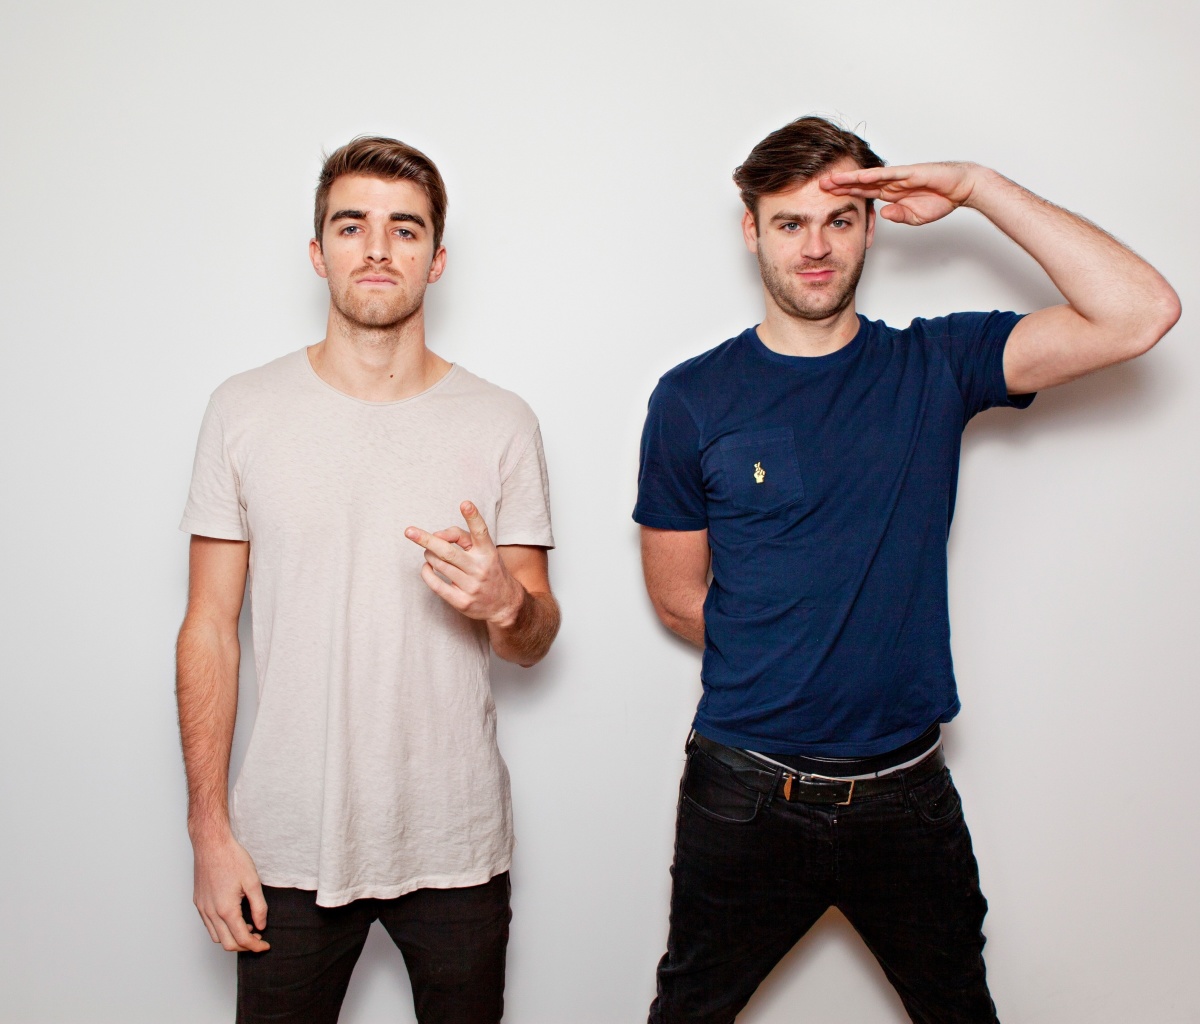 The Chainsmokers with Andrew Taggart and Alex Pall wallpaper 1200x1024